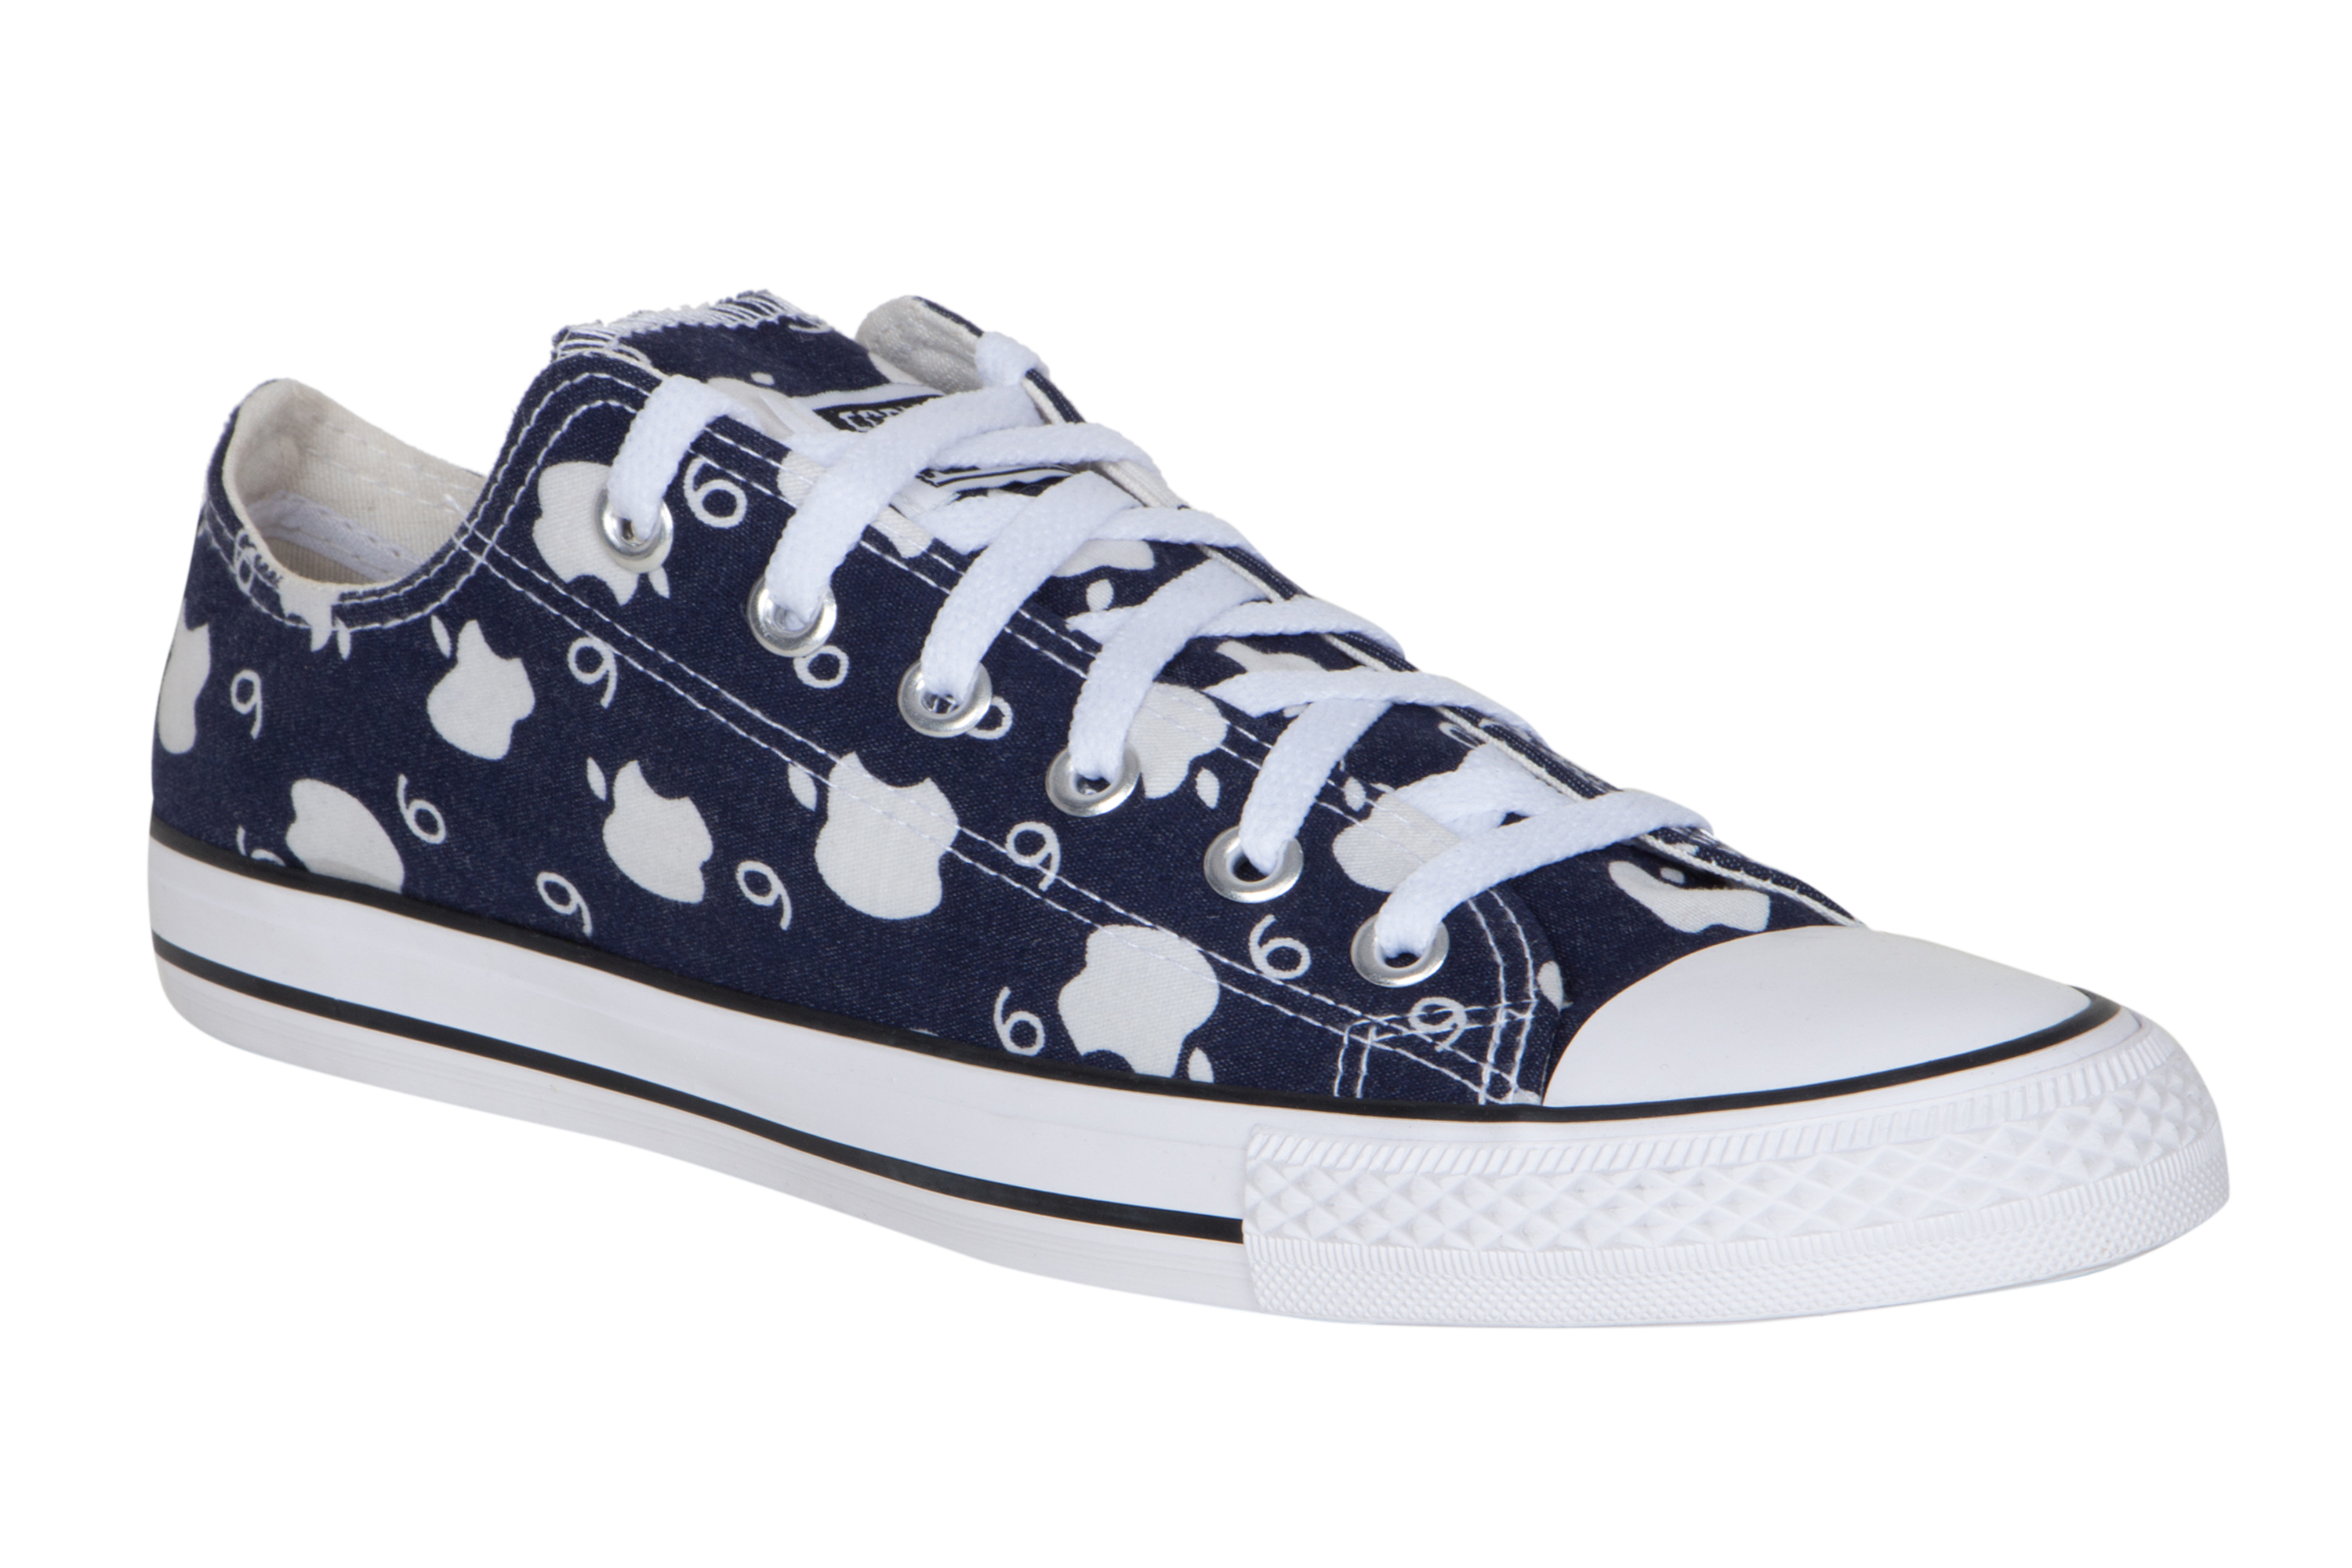 Buy Converse Men's Blue Lace Up Sneakers Online @ ₹1499 from ShopClues